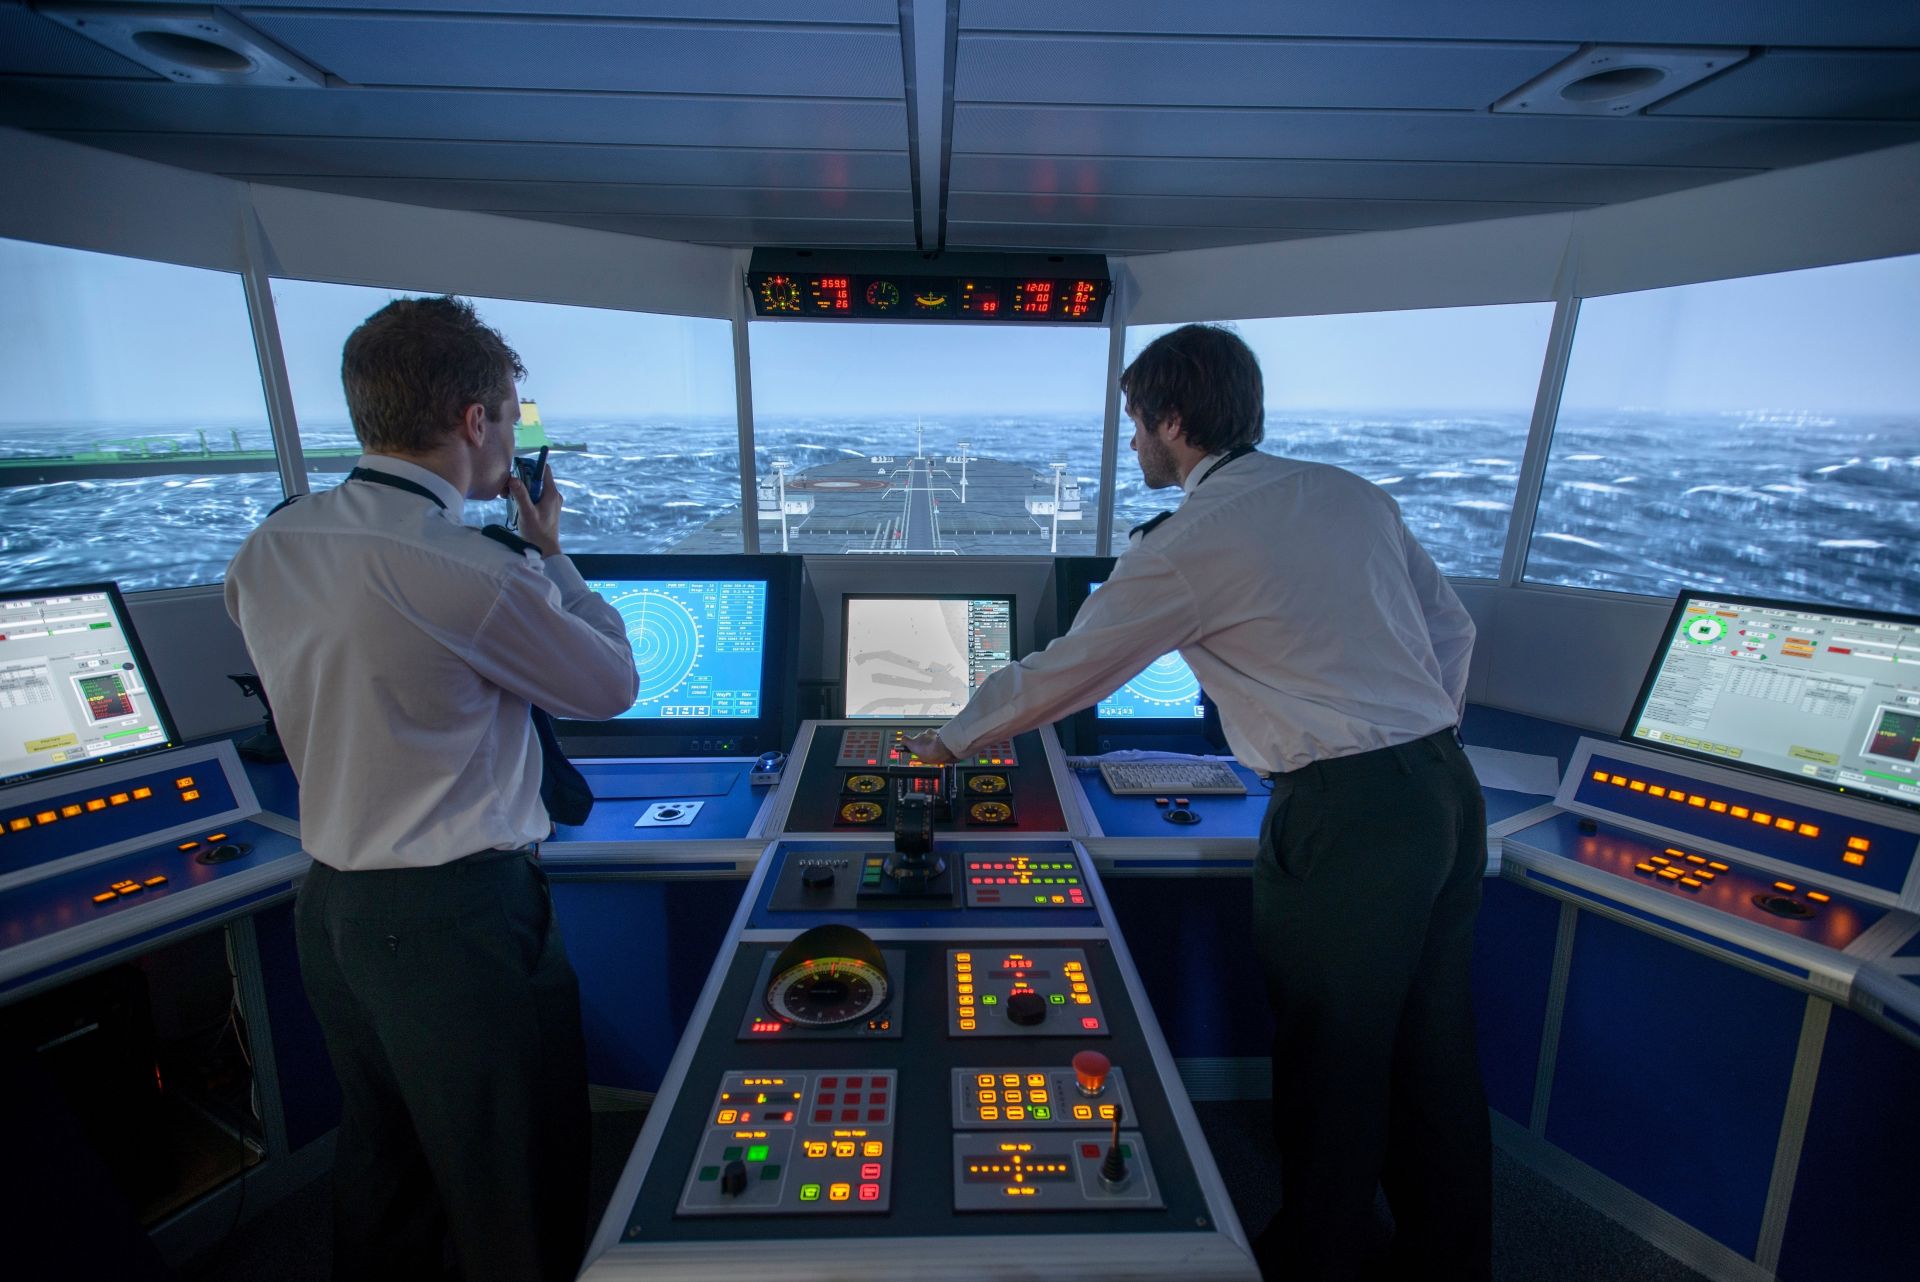 Ship officers monitoring navigational equipment and coordinating on the bridge in simulated adverse weather conditions.